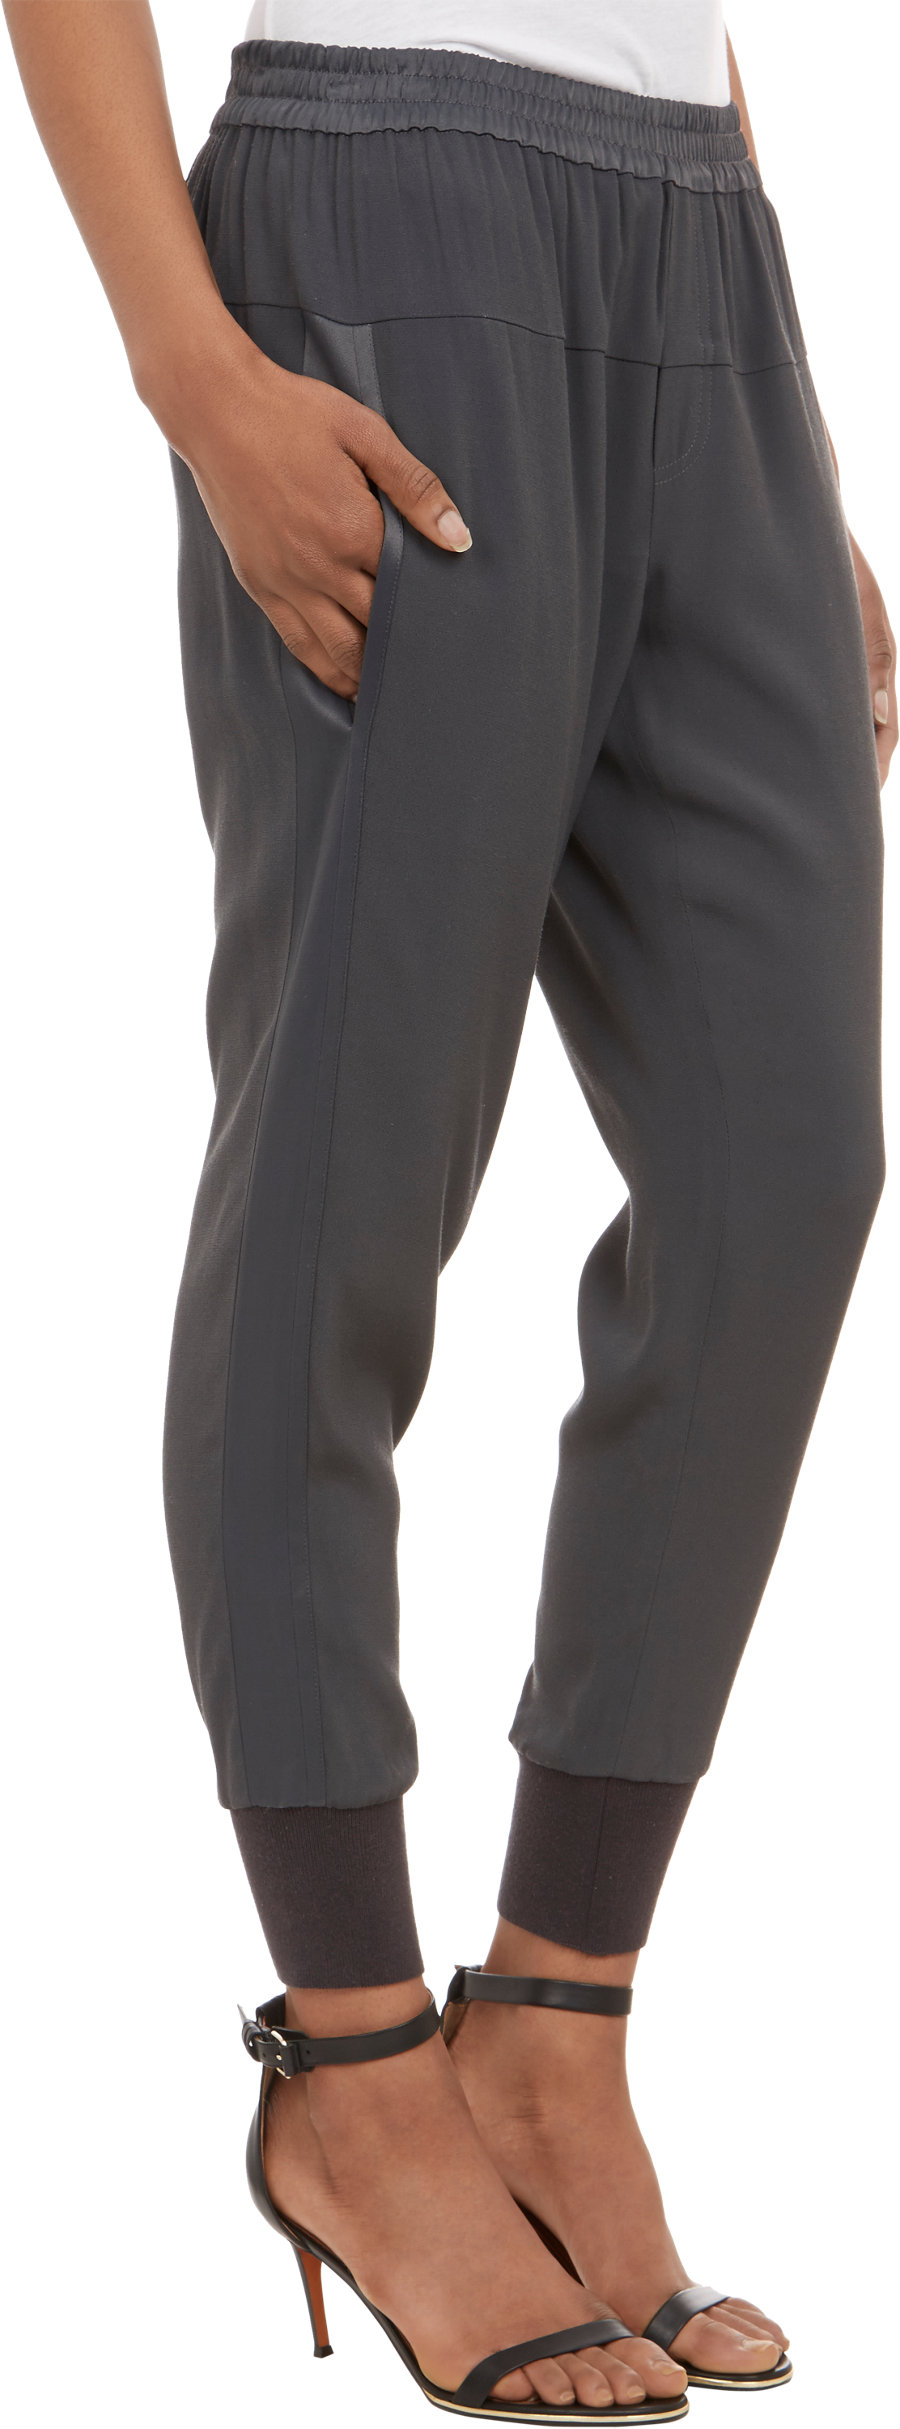 Lyst - Vince Satin-Back Crepe Jogger Pants-Grey Size S in Gray